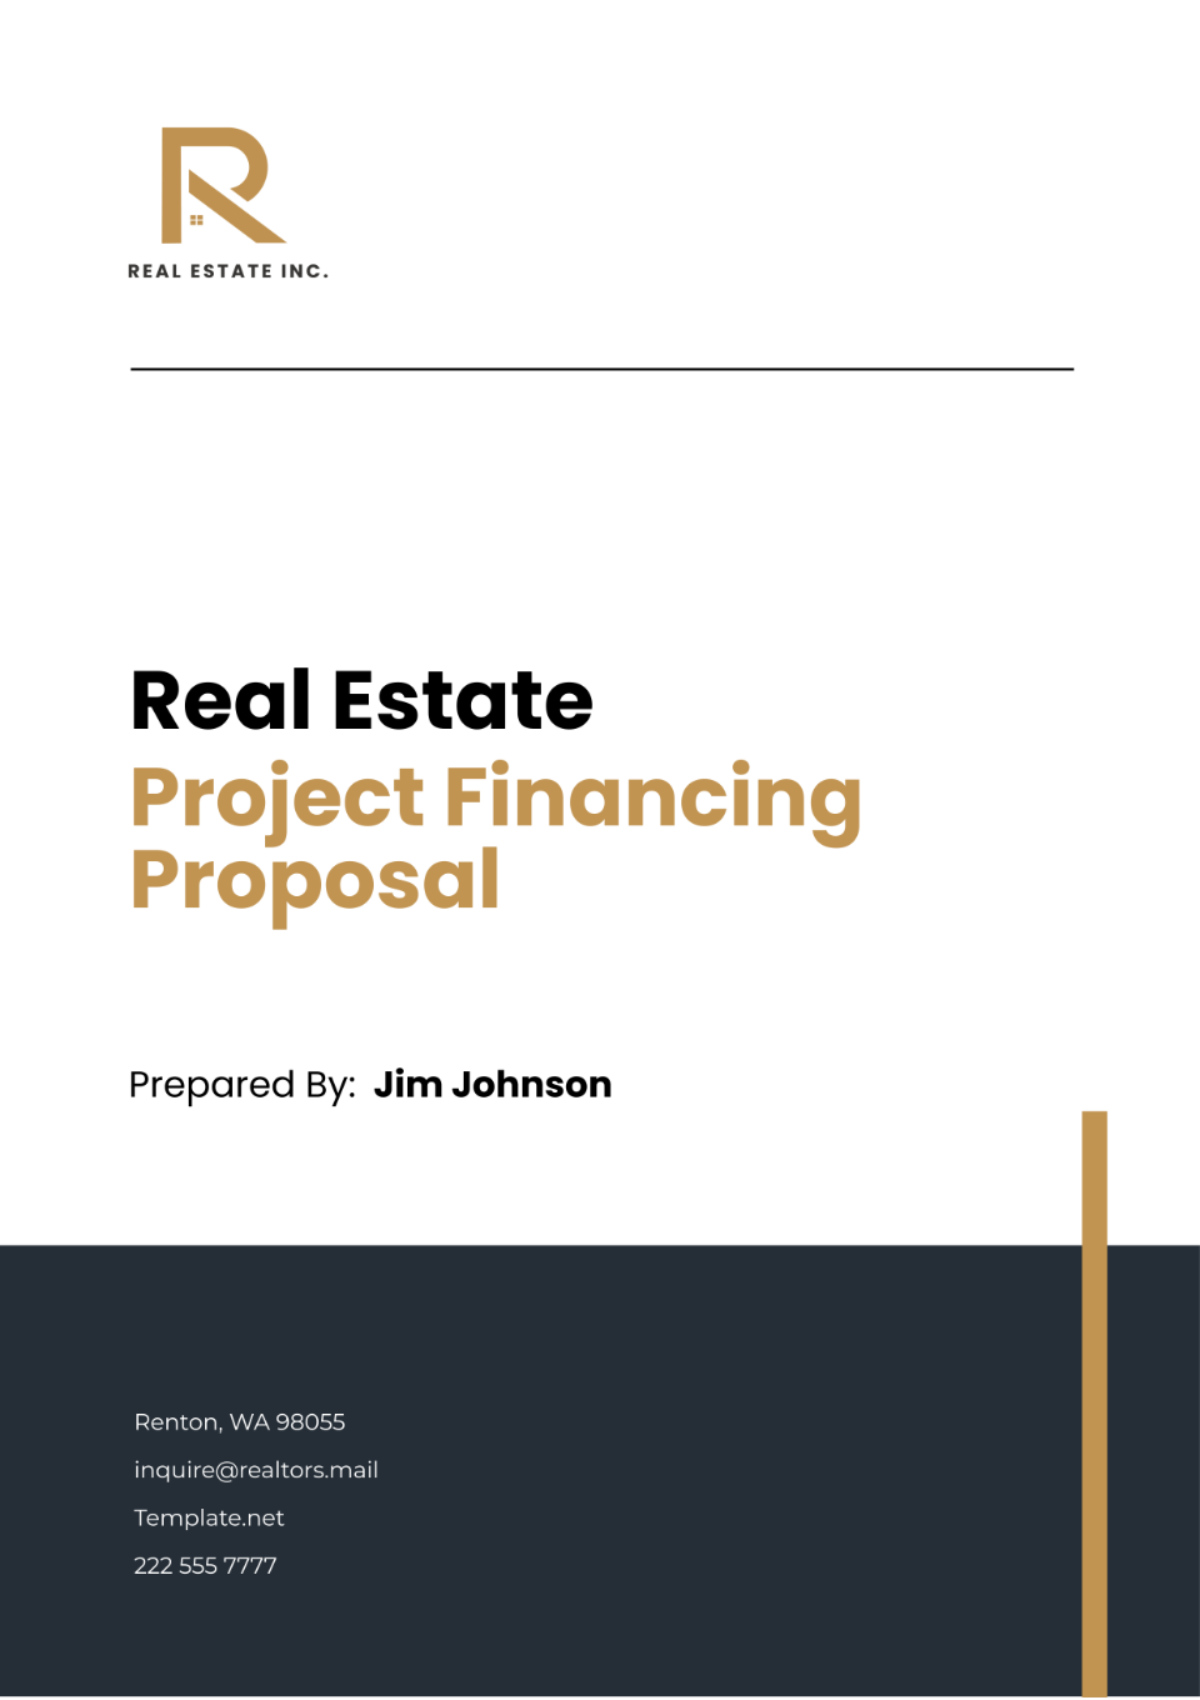 Free Real Estate Project Financing Proposal Template